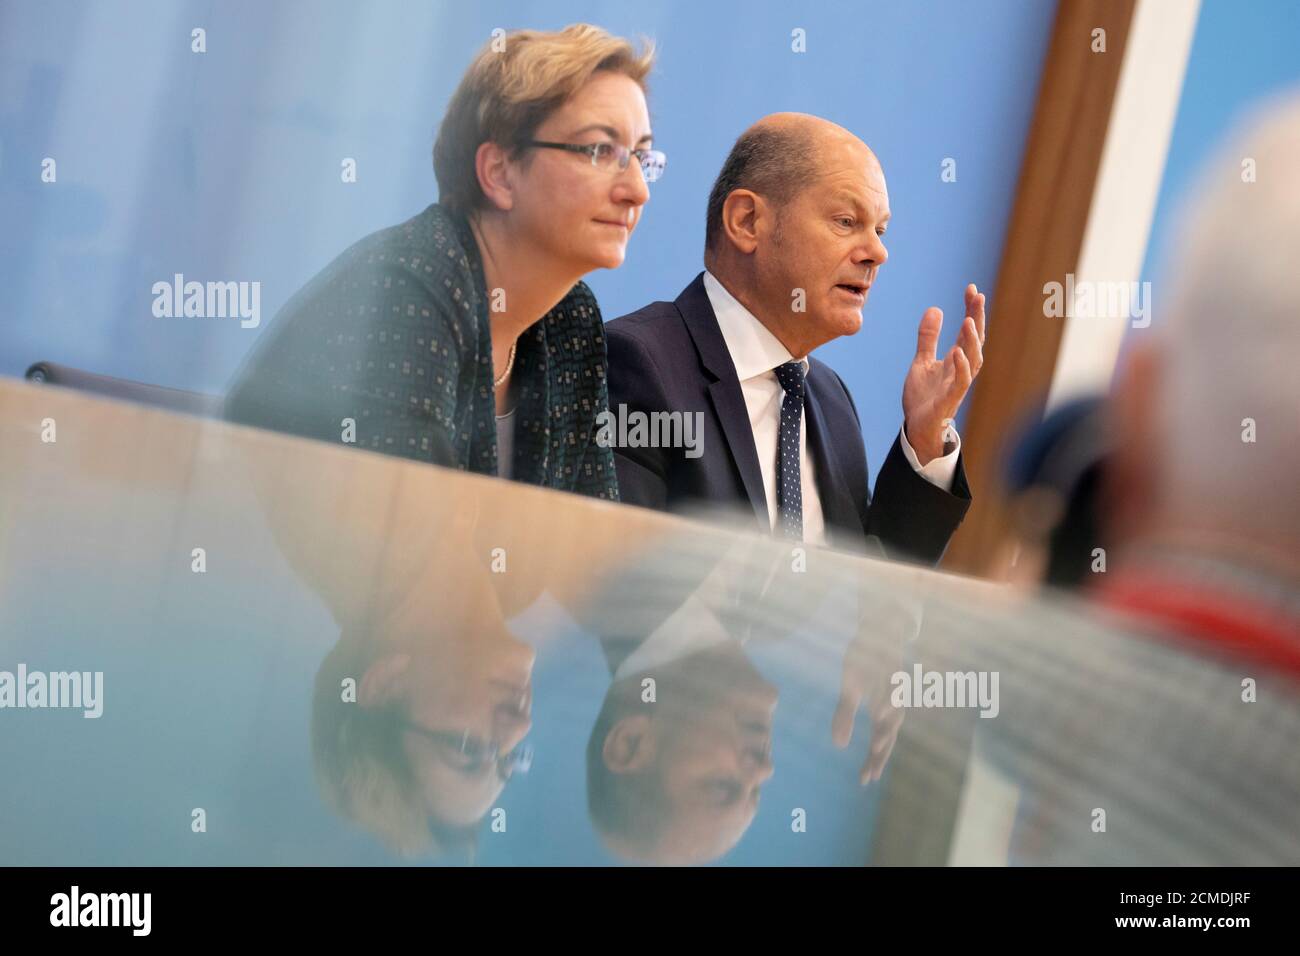 German Finance Minister Olaf Scholz and state legislator Klara Geywitz attend a news conference on their joint bid to lead their centre-left SPD party in Berlin, Germany, August 21, 2019.   REUTERS/Axel Schmidt Stock Photo